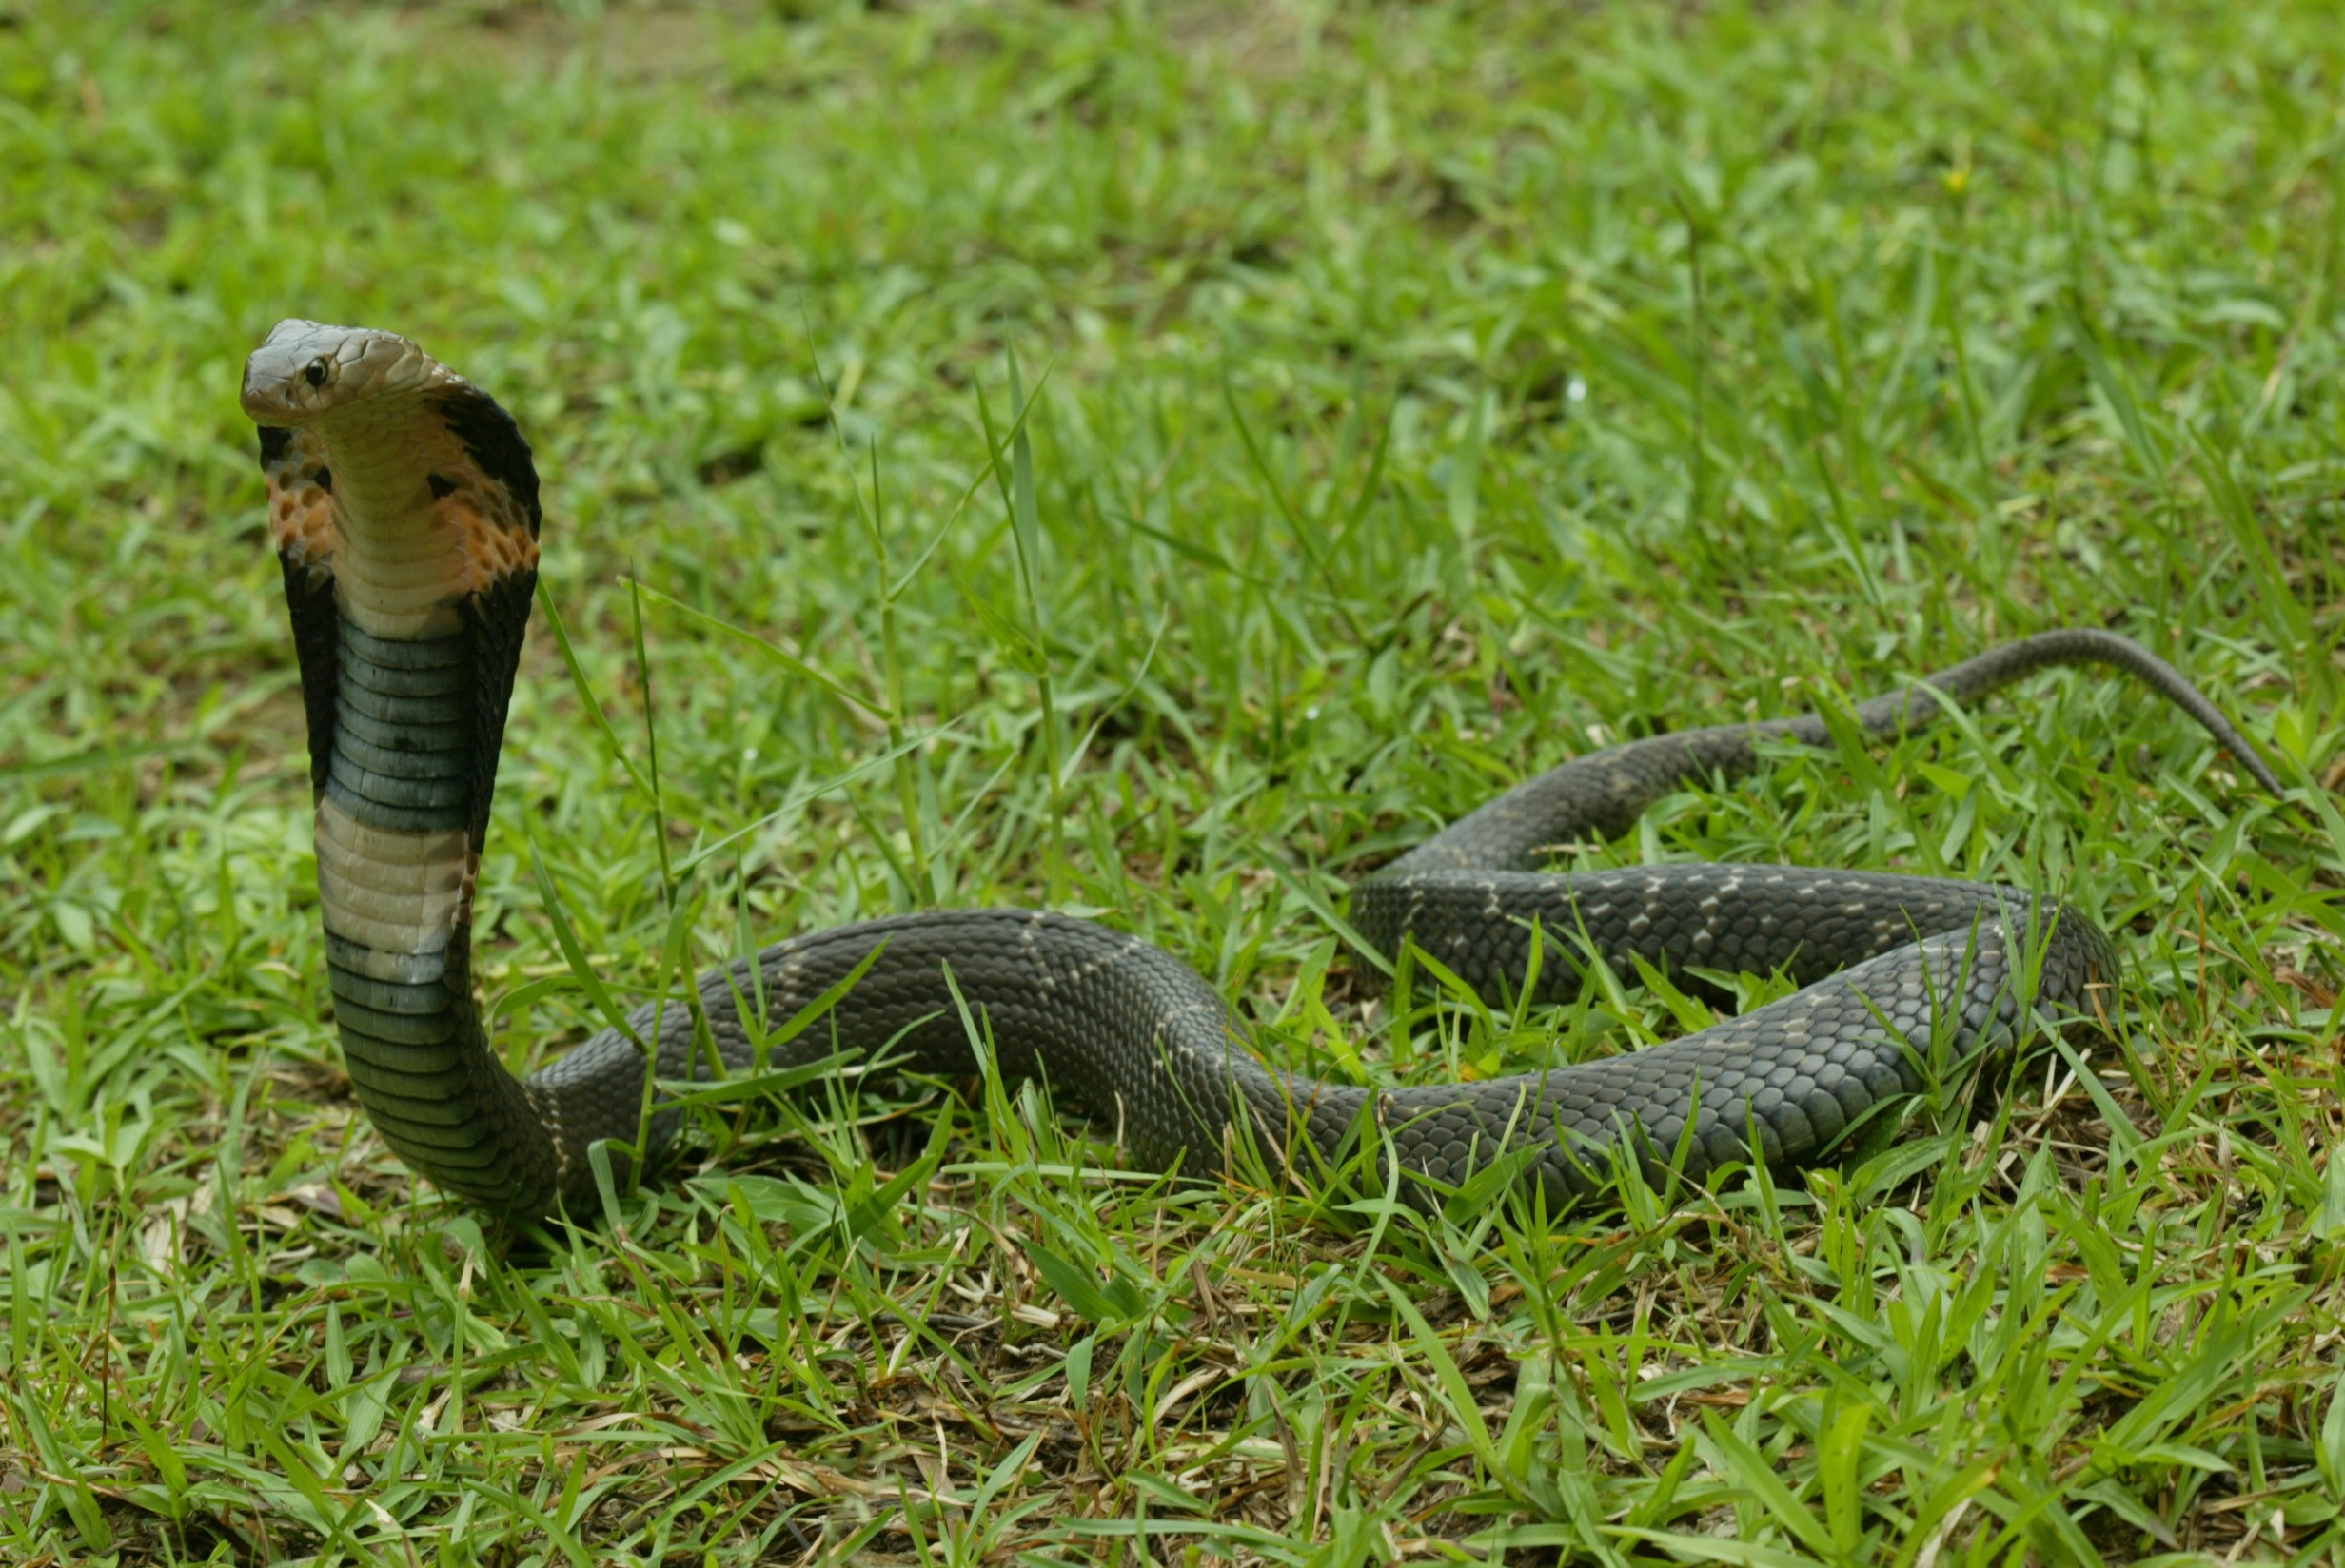 One of Hong Kong’s most venomous snakes, the Chinese cobra can be founds in grassy, shrubby, wooded and mangrove areas. Photo: AFCD